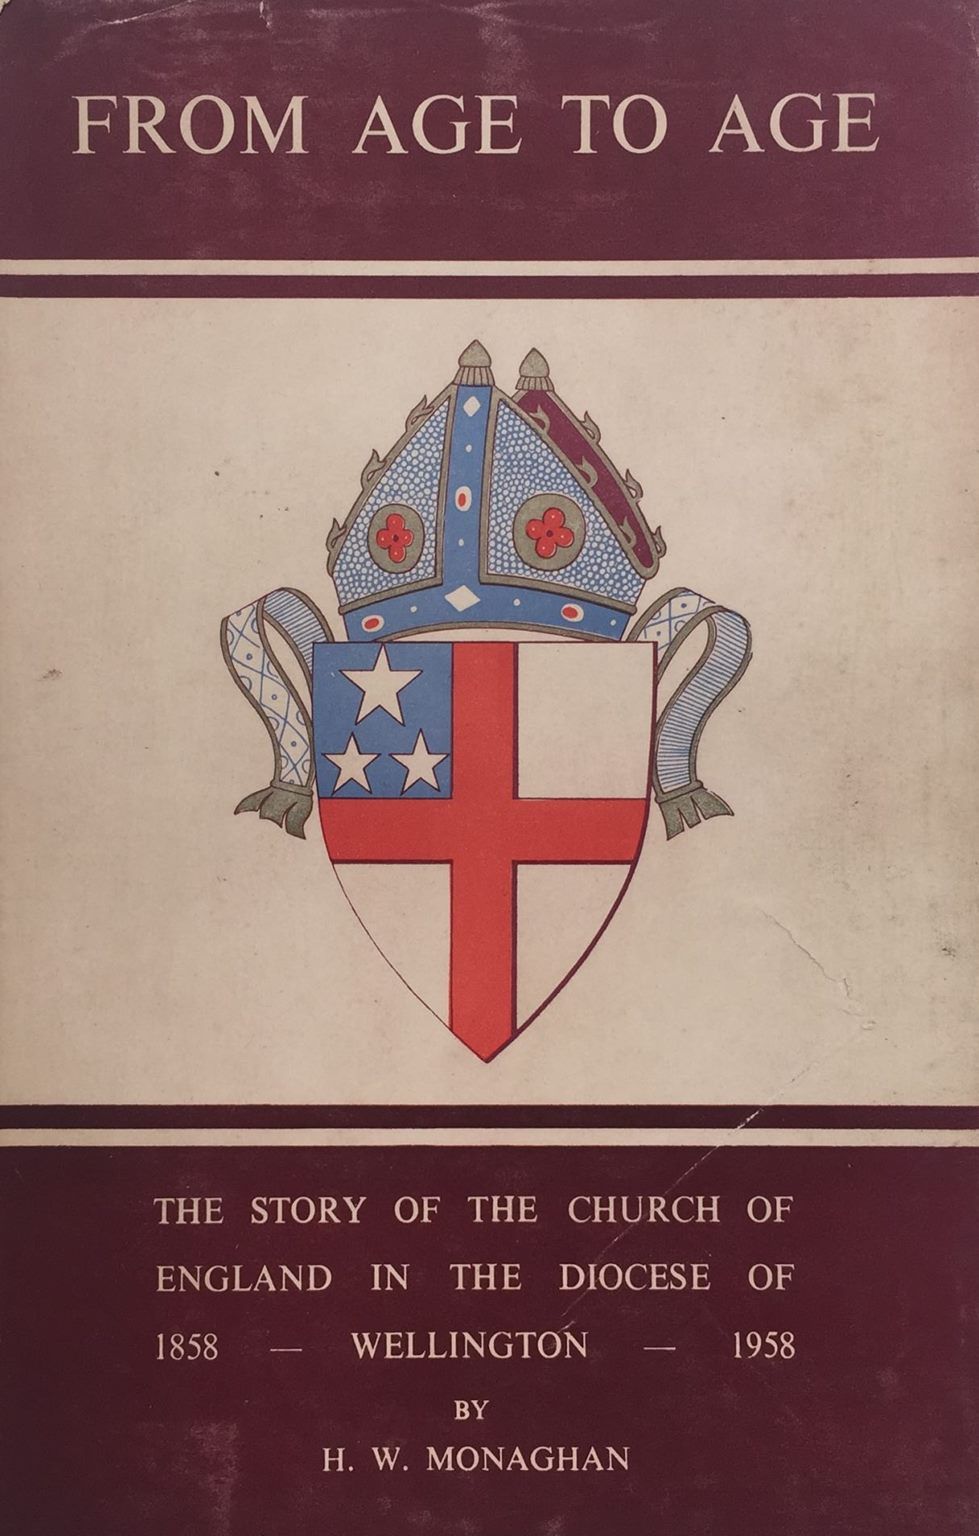 FROM AGE TO AGE: The Story of The Church of England, Wellington 1858 -1958